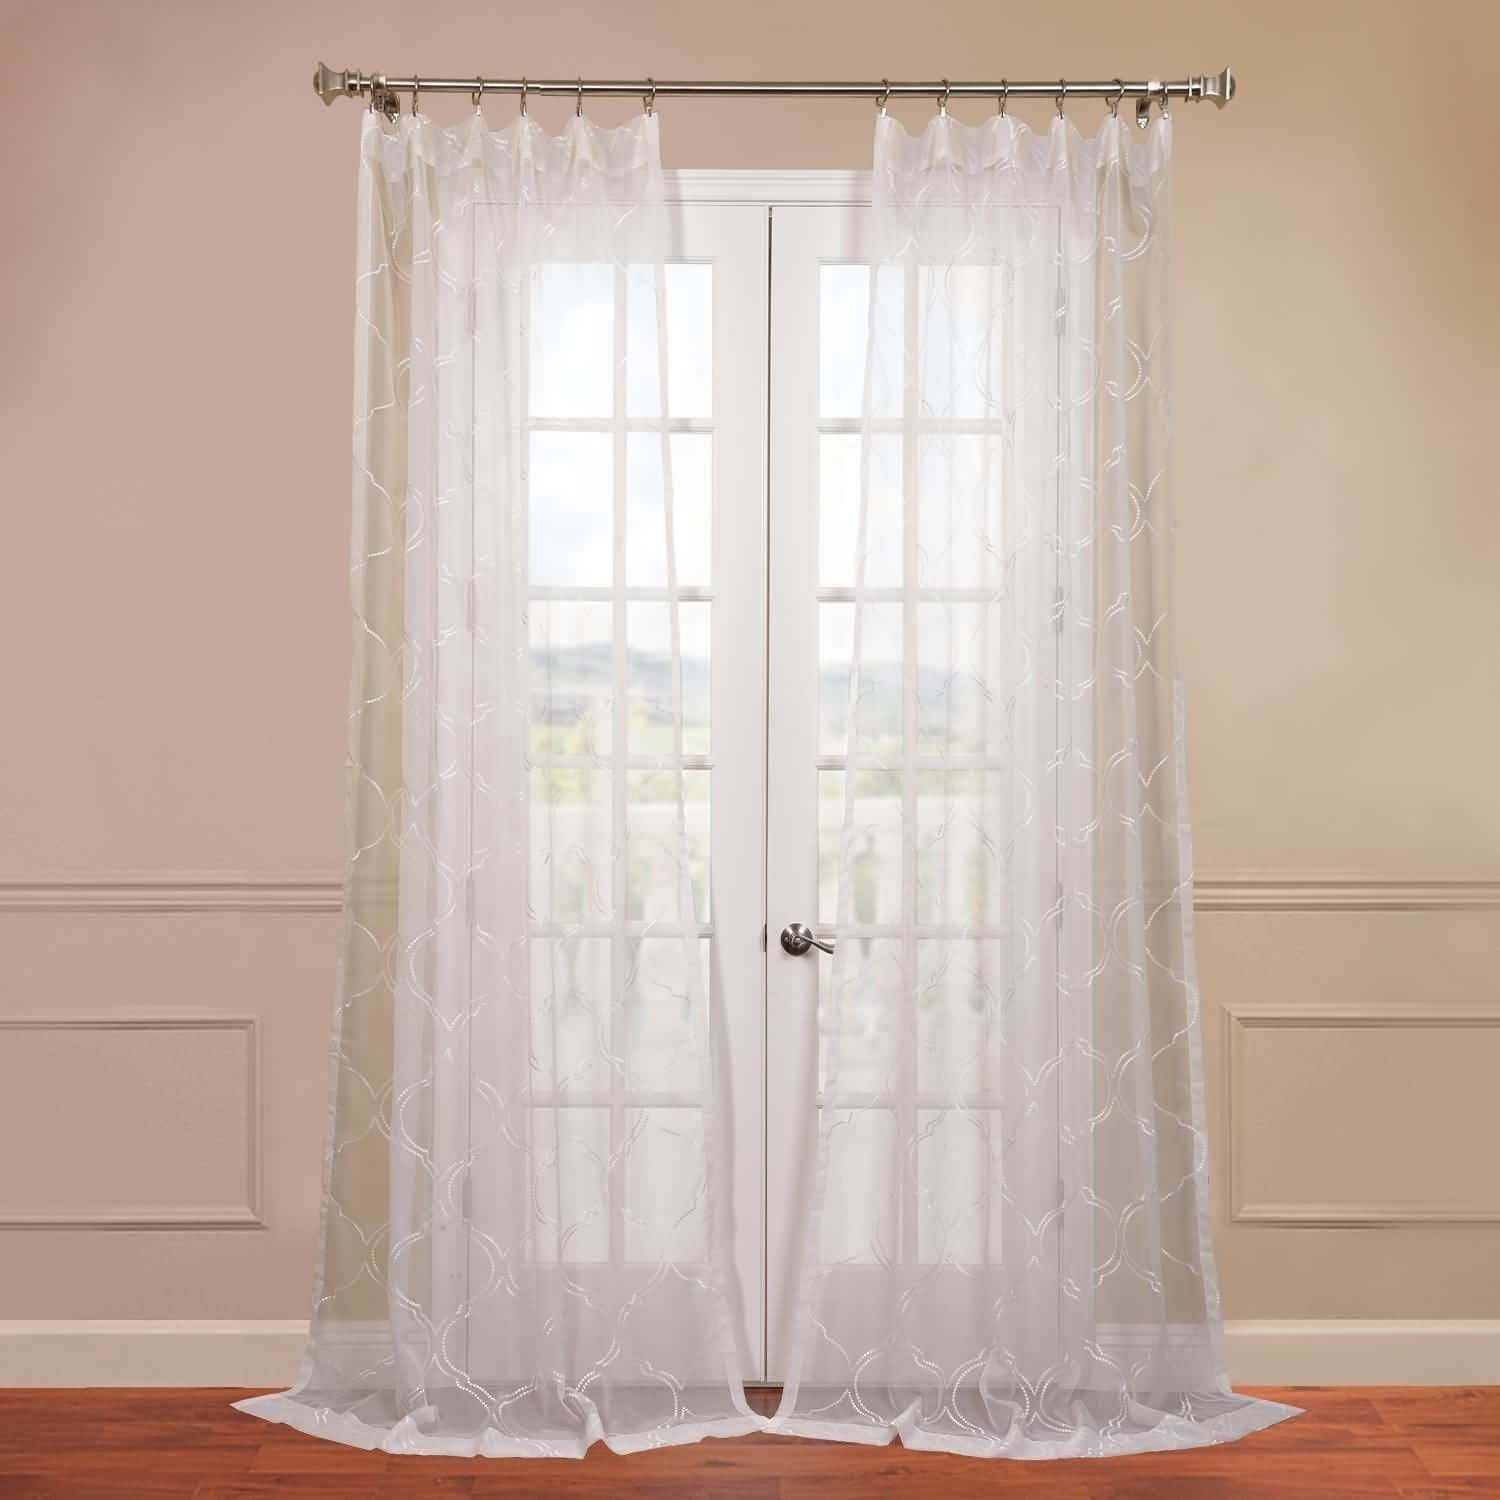 Exclusive Fabrics Florentina White Embroidered Sheer Curtain Panel Throughout Kida Embroidered Sheer Curtain Panels (View 4 of 20)